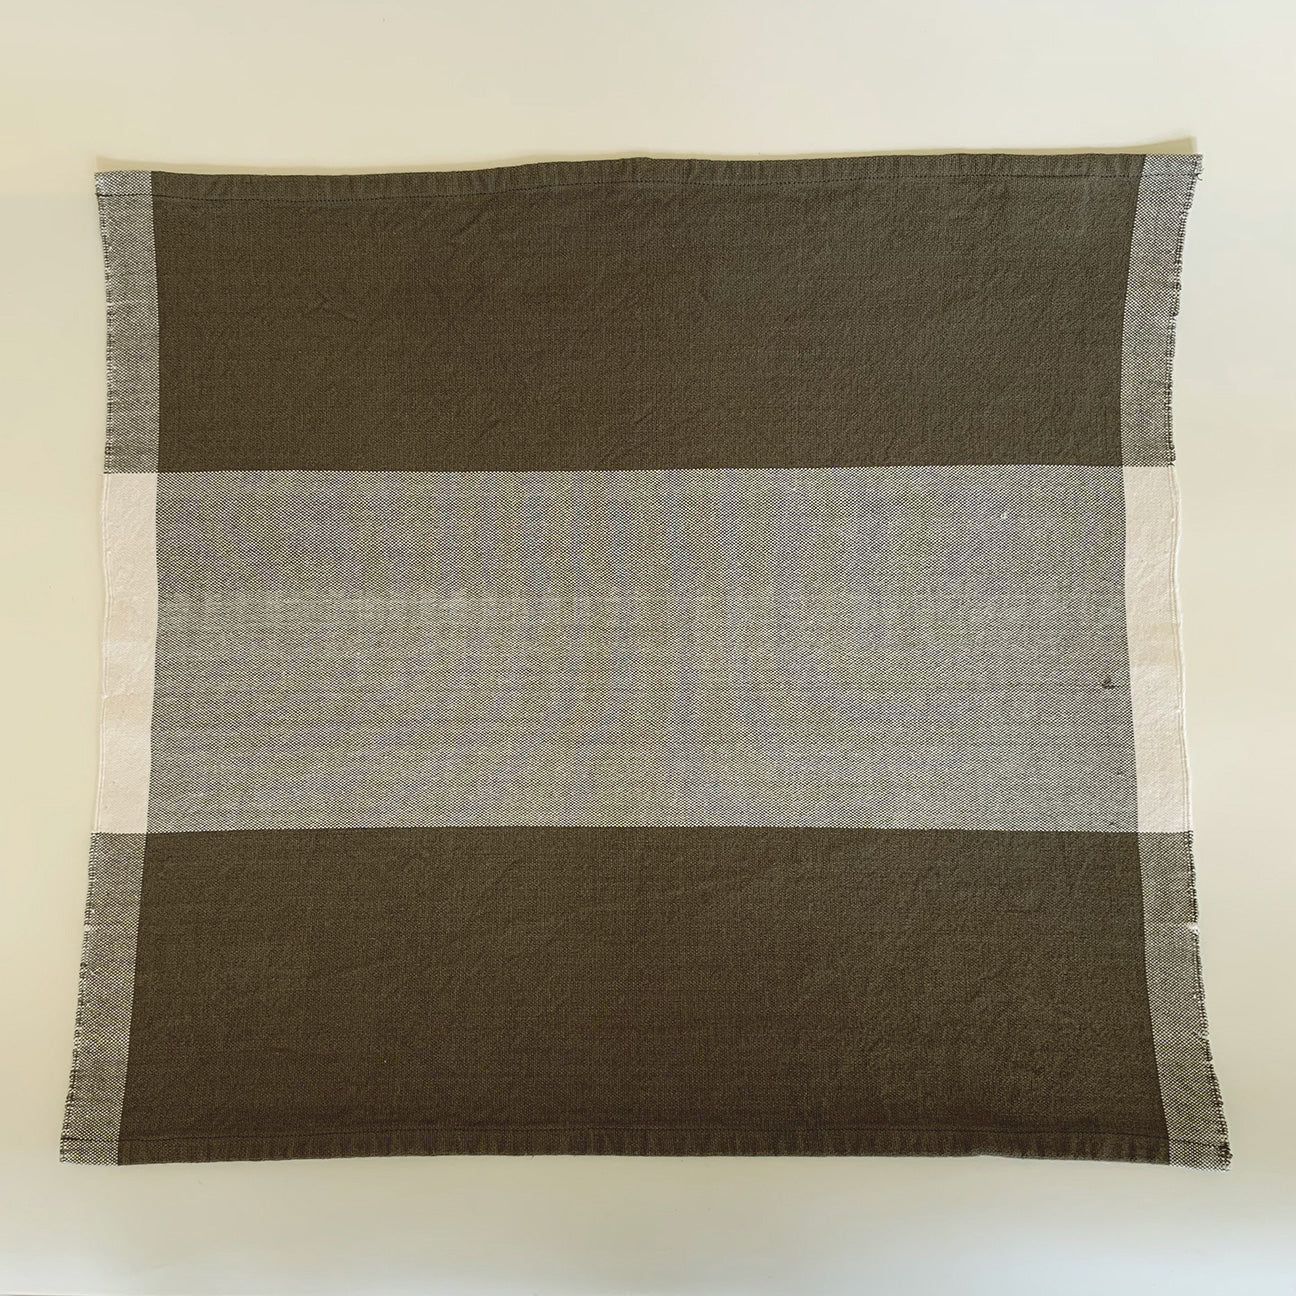 Image of M+A NYC Colorblock Napkin in Mineral/Kora.